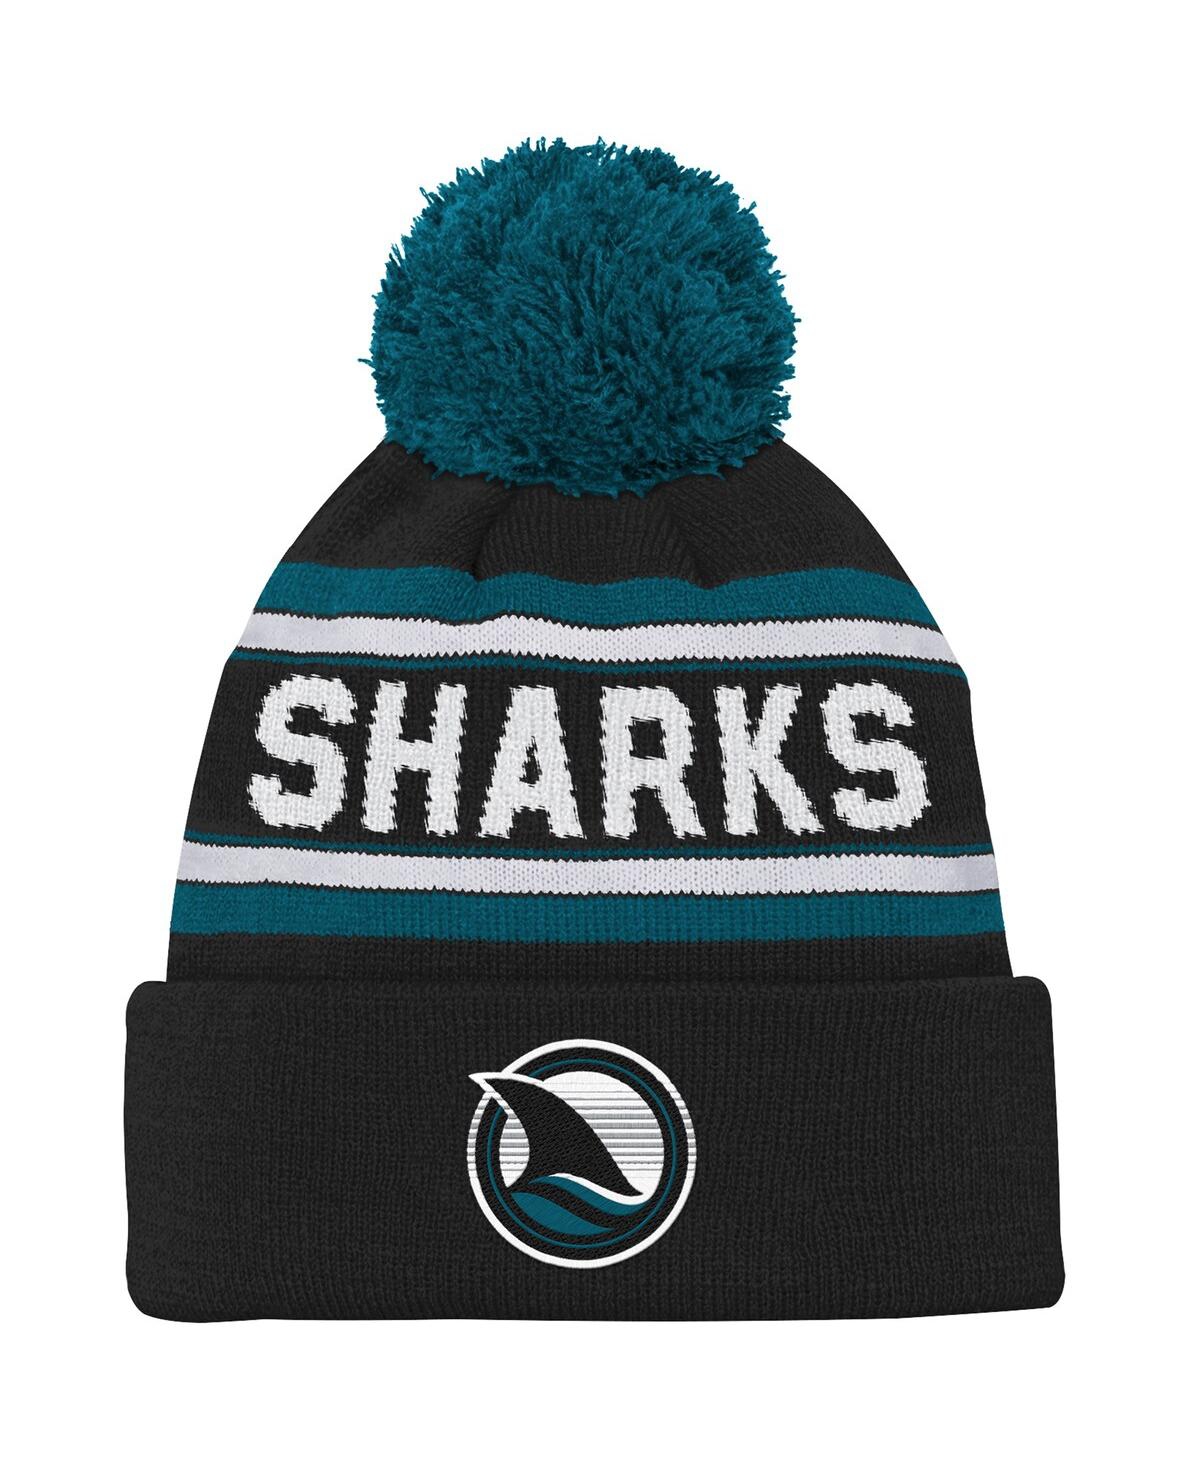 Outerstuff Kids' Youth Boys And Girls Teal San Jose Sharks Alternate Jacquard Cuffed Knit Hat With Pom